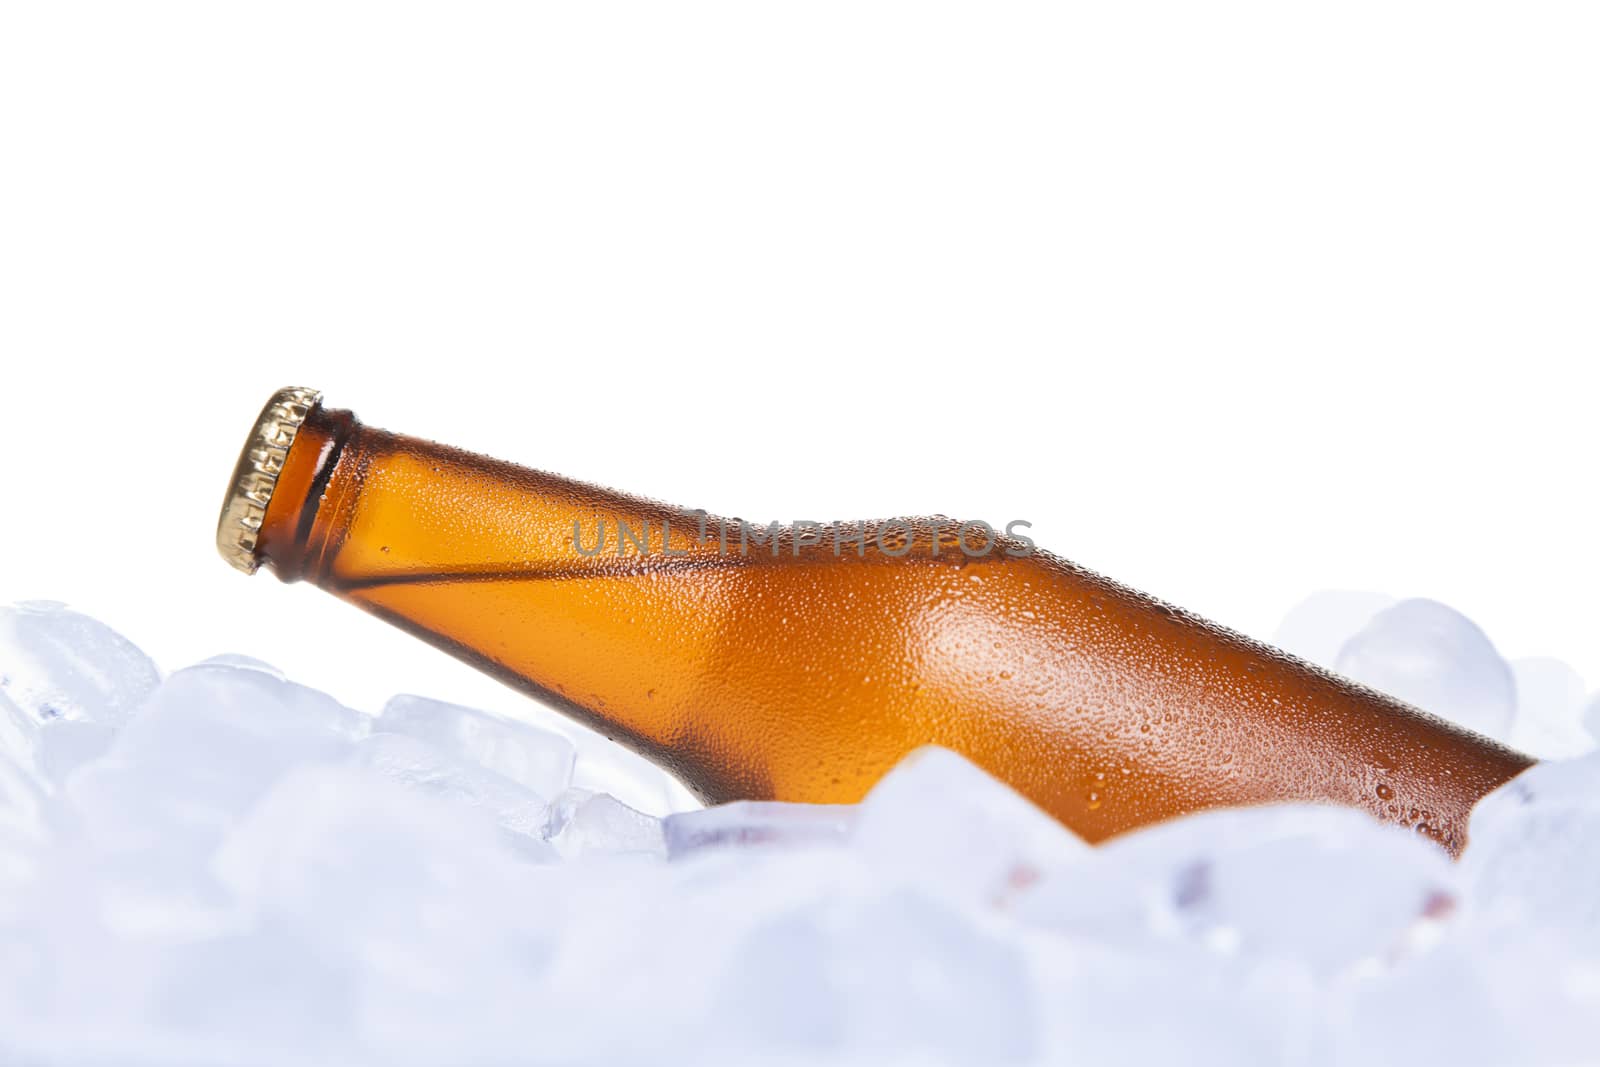 A bottle of beer buried on ice.